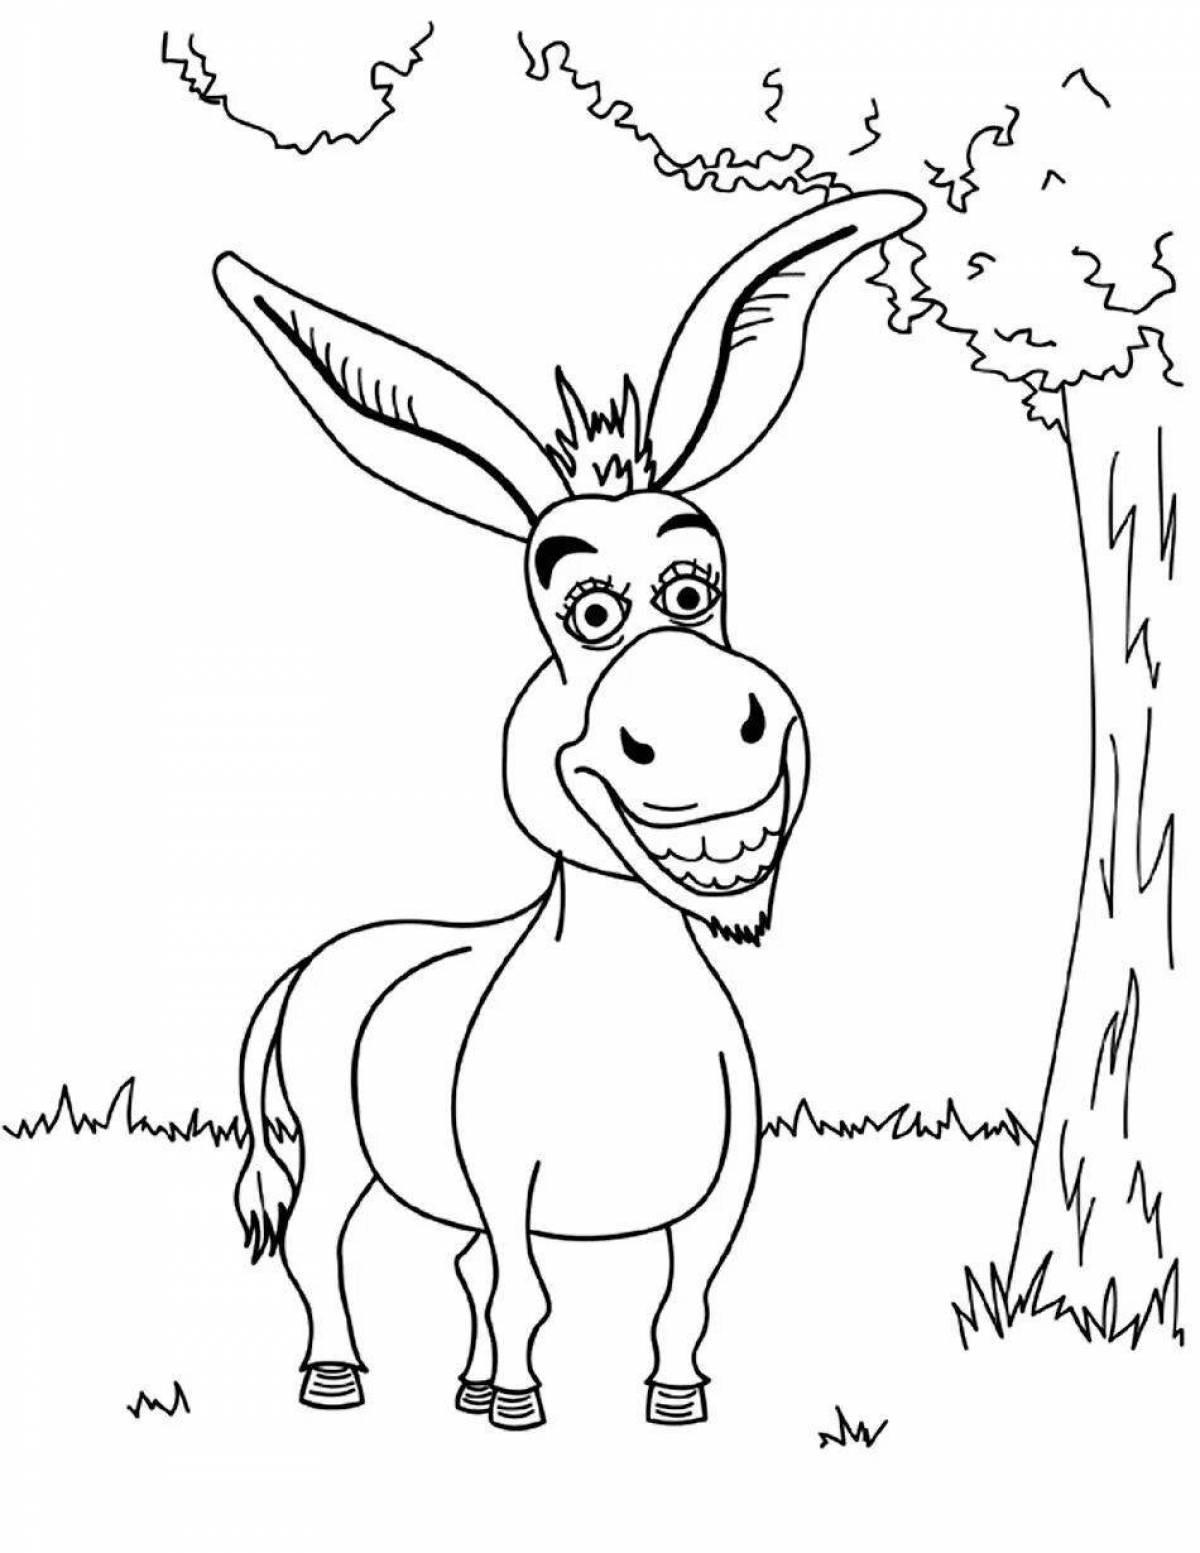 Exciting coloring donkey from shrek